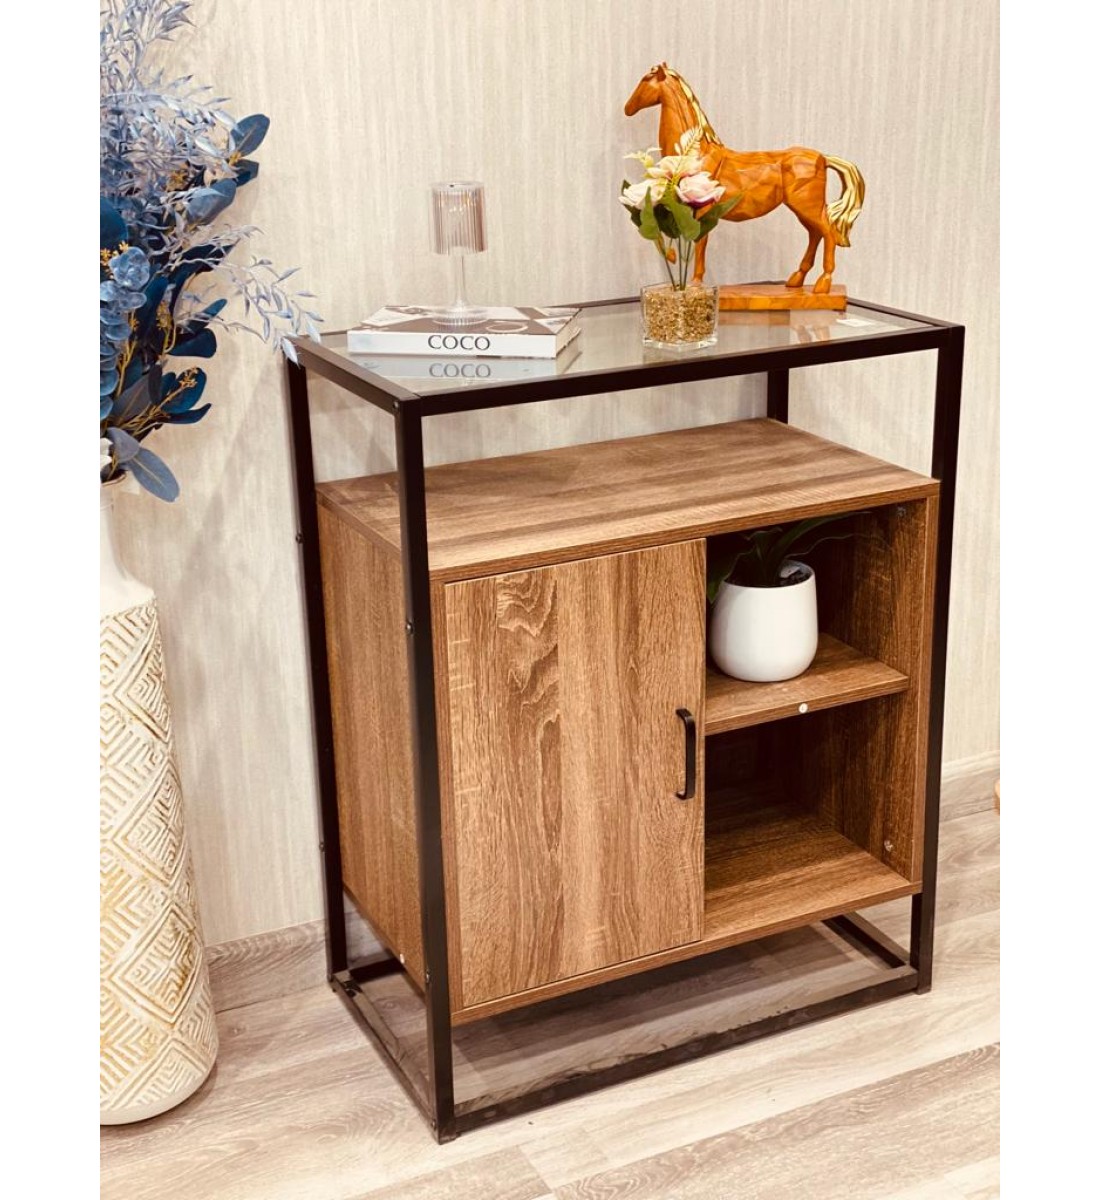 Wooden coffee cupboard decorated with iron (80 * 65 * 35 cm)